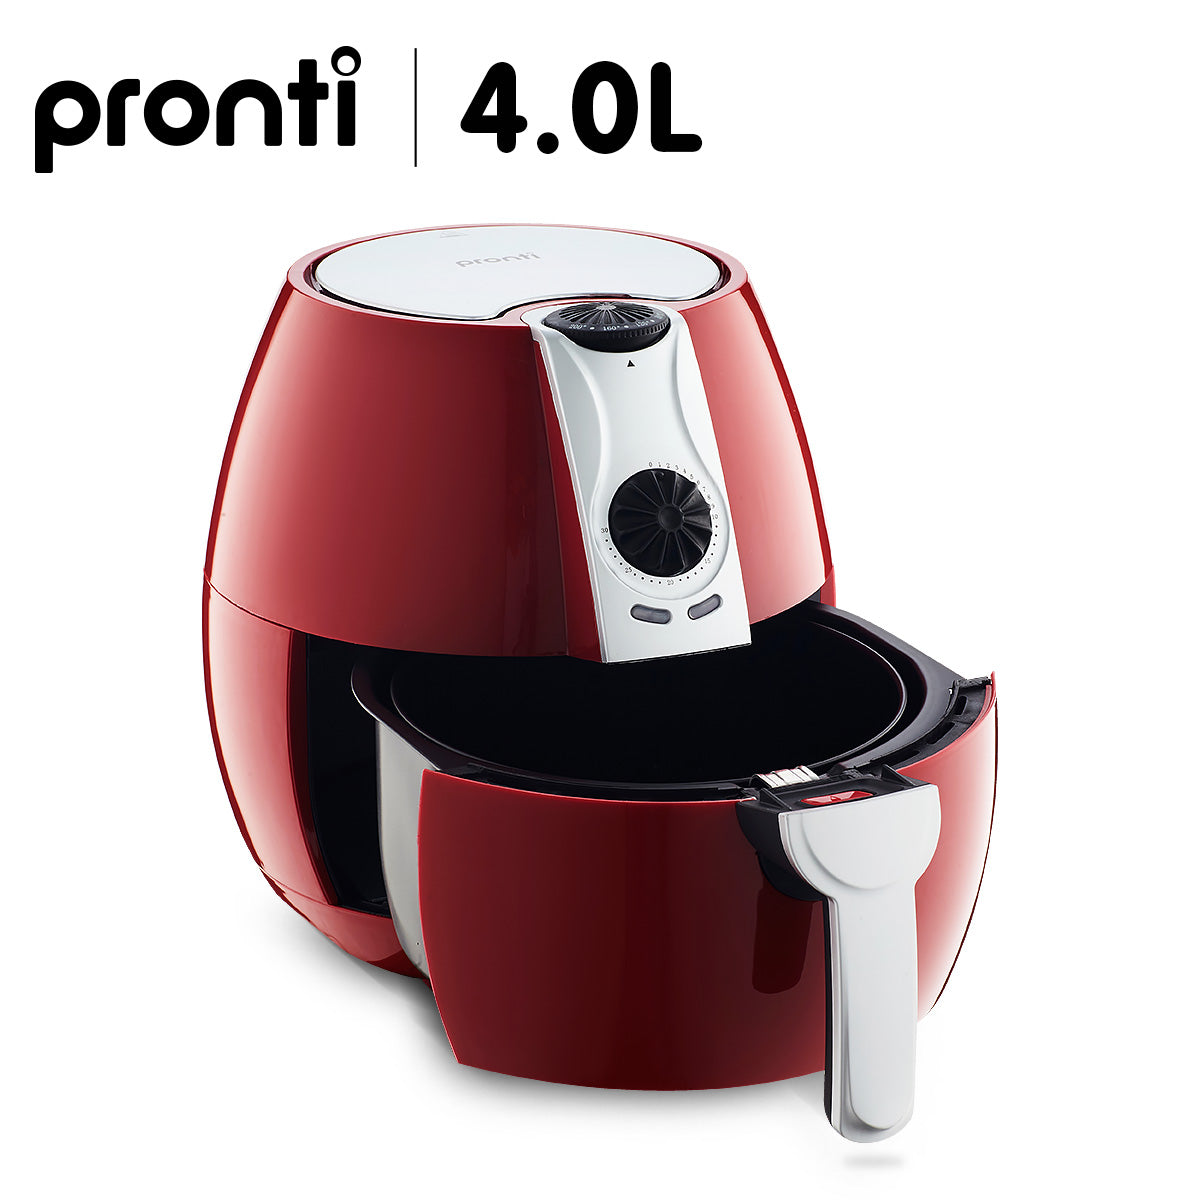 Pronti Air Fryer Cooker 4.0L HF-989 - Red